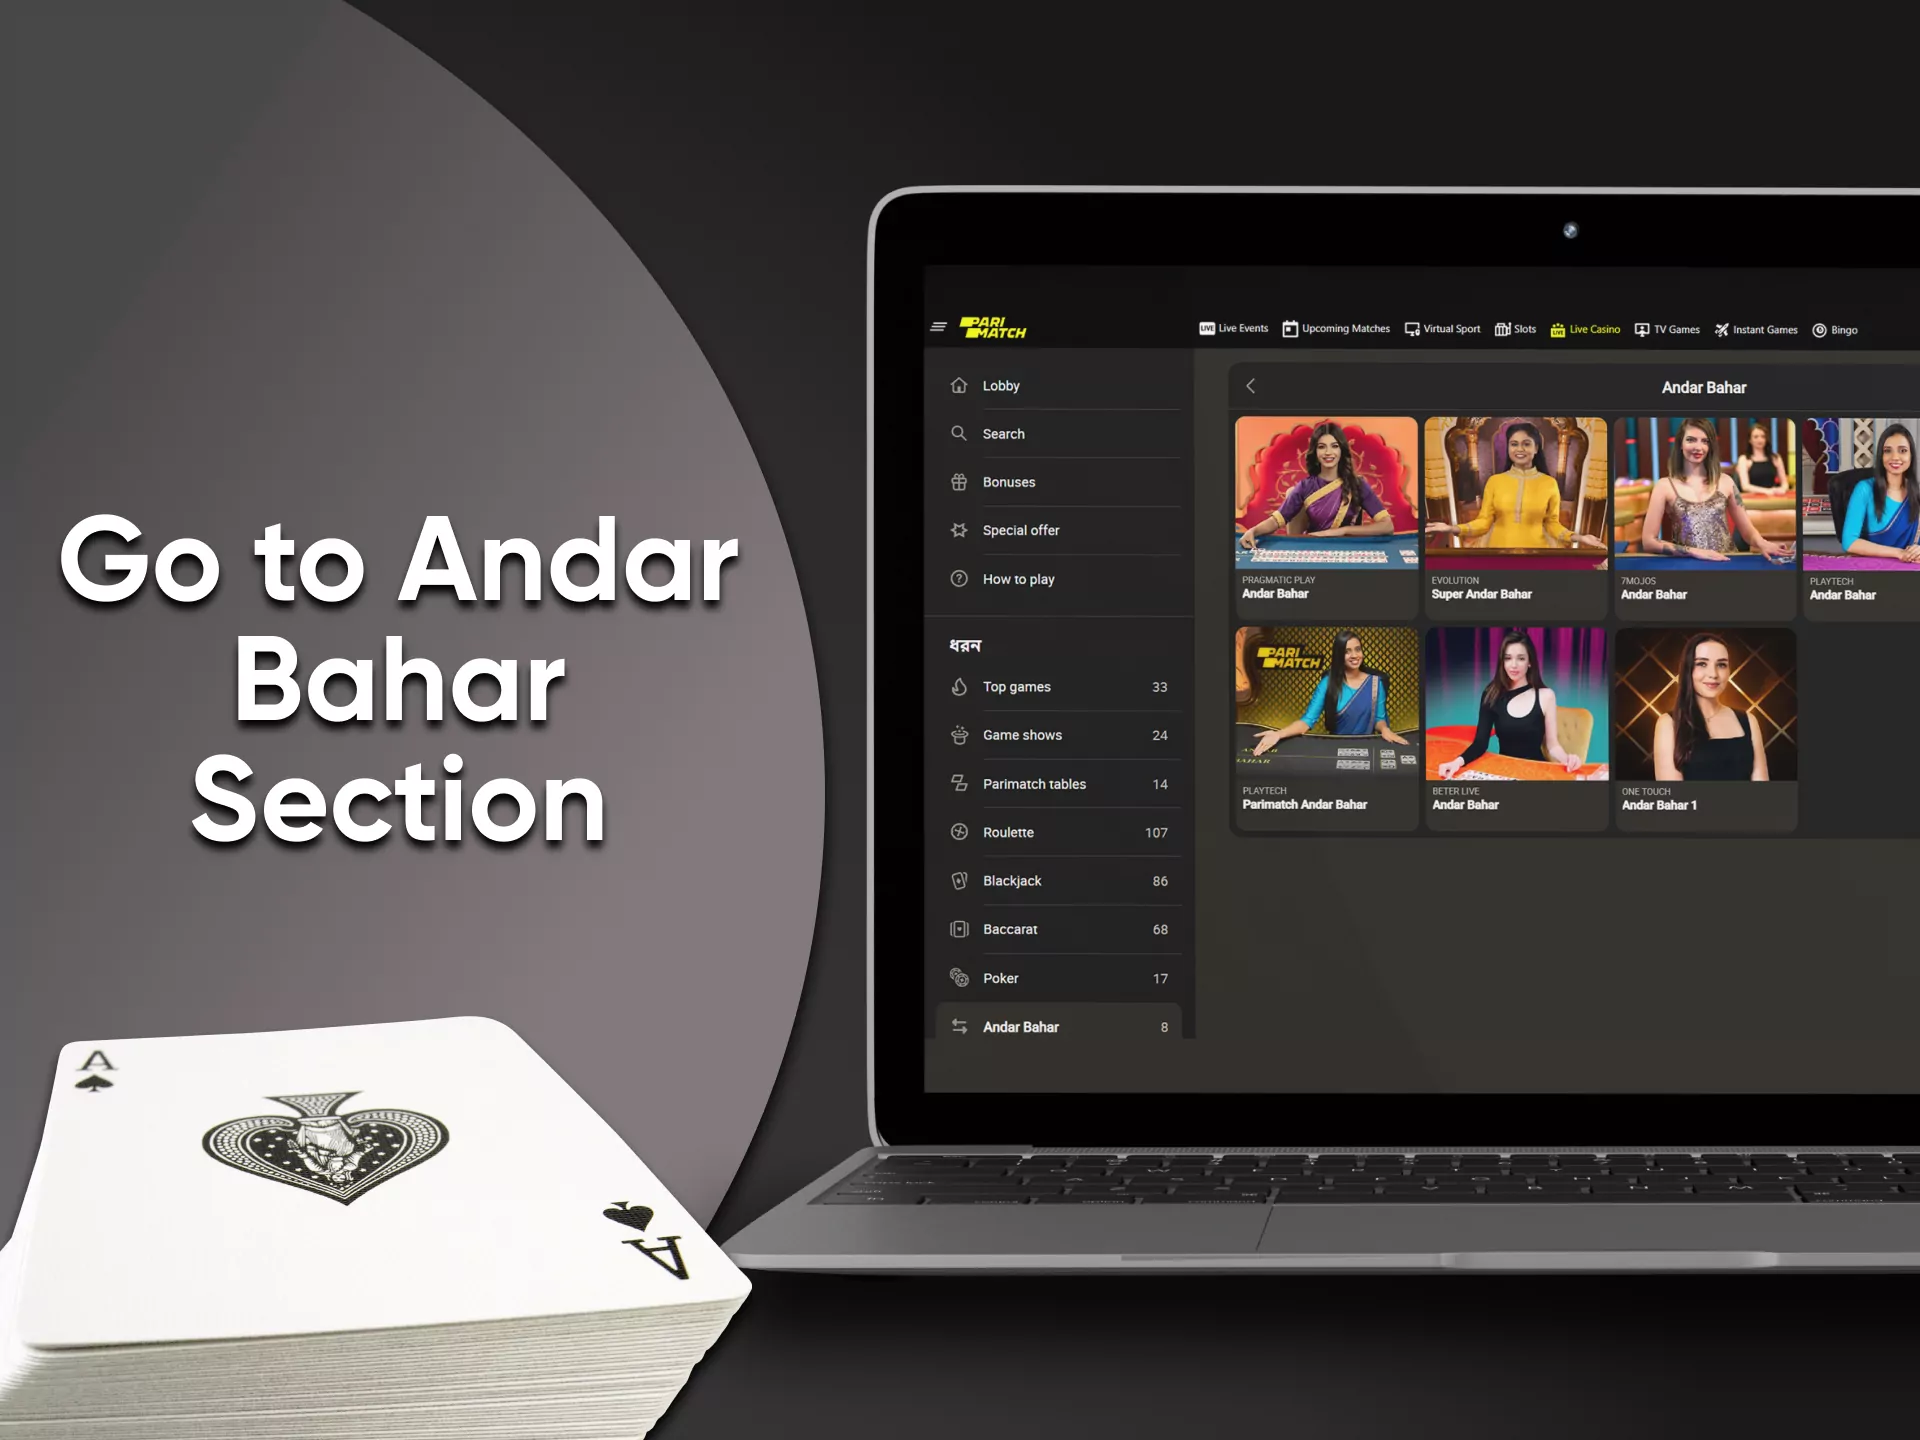 Go to the right section to play Andar Bahar.